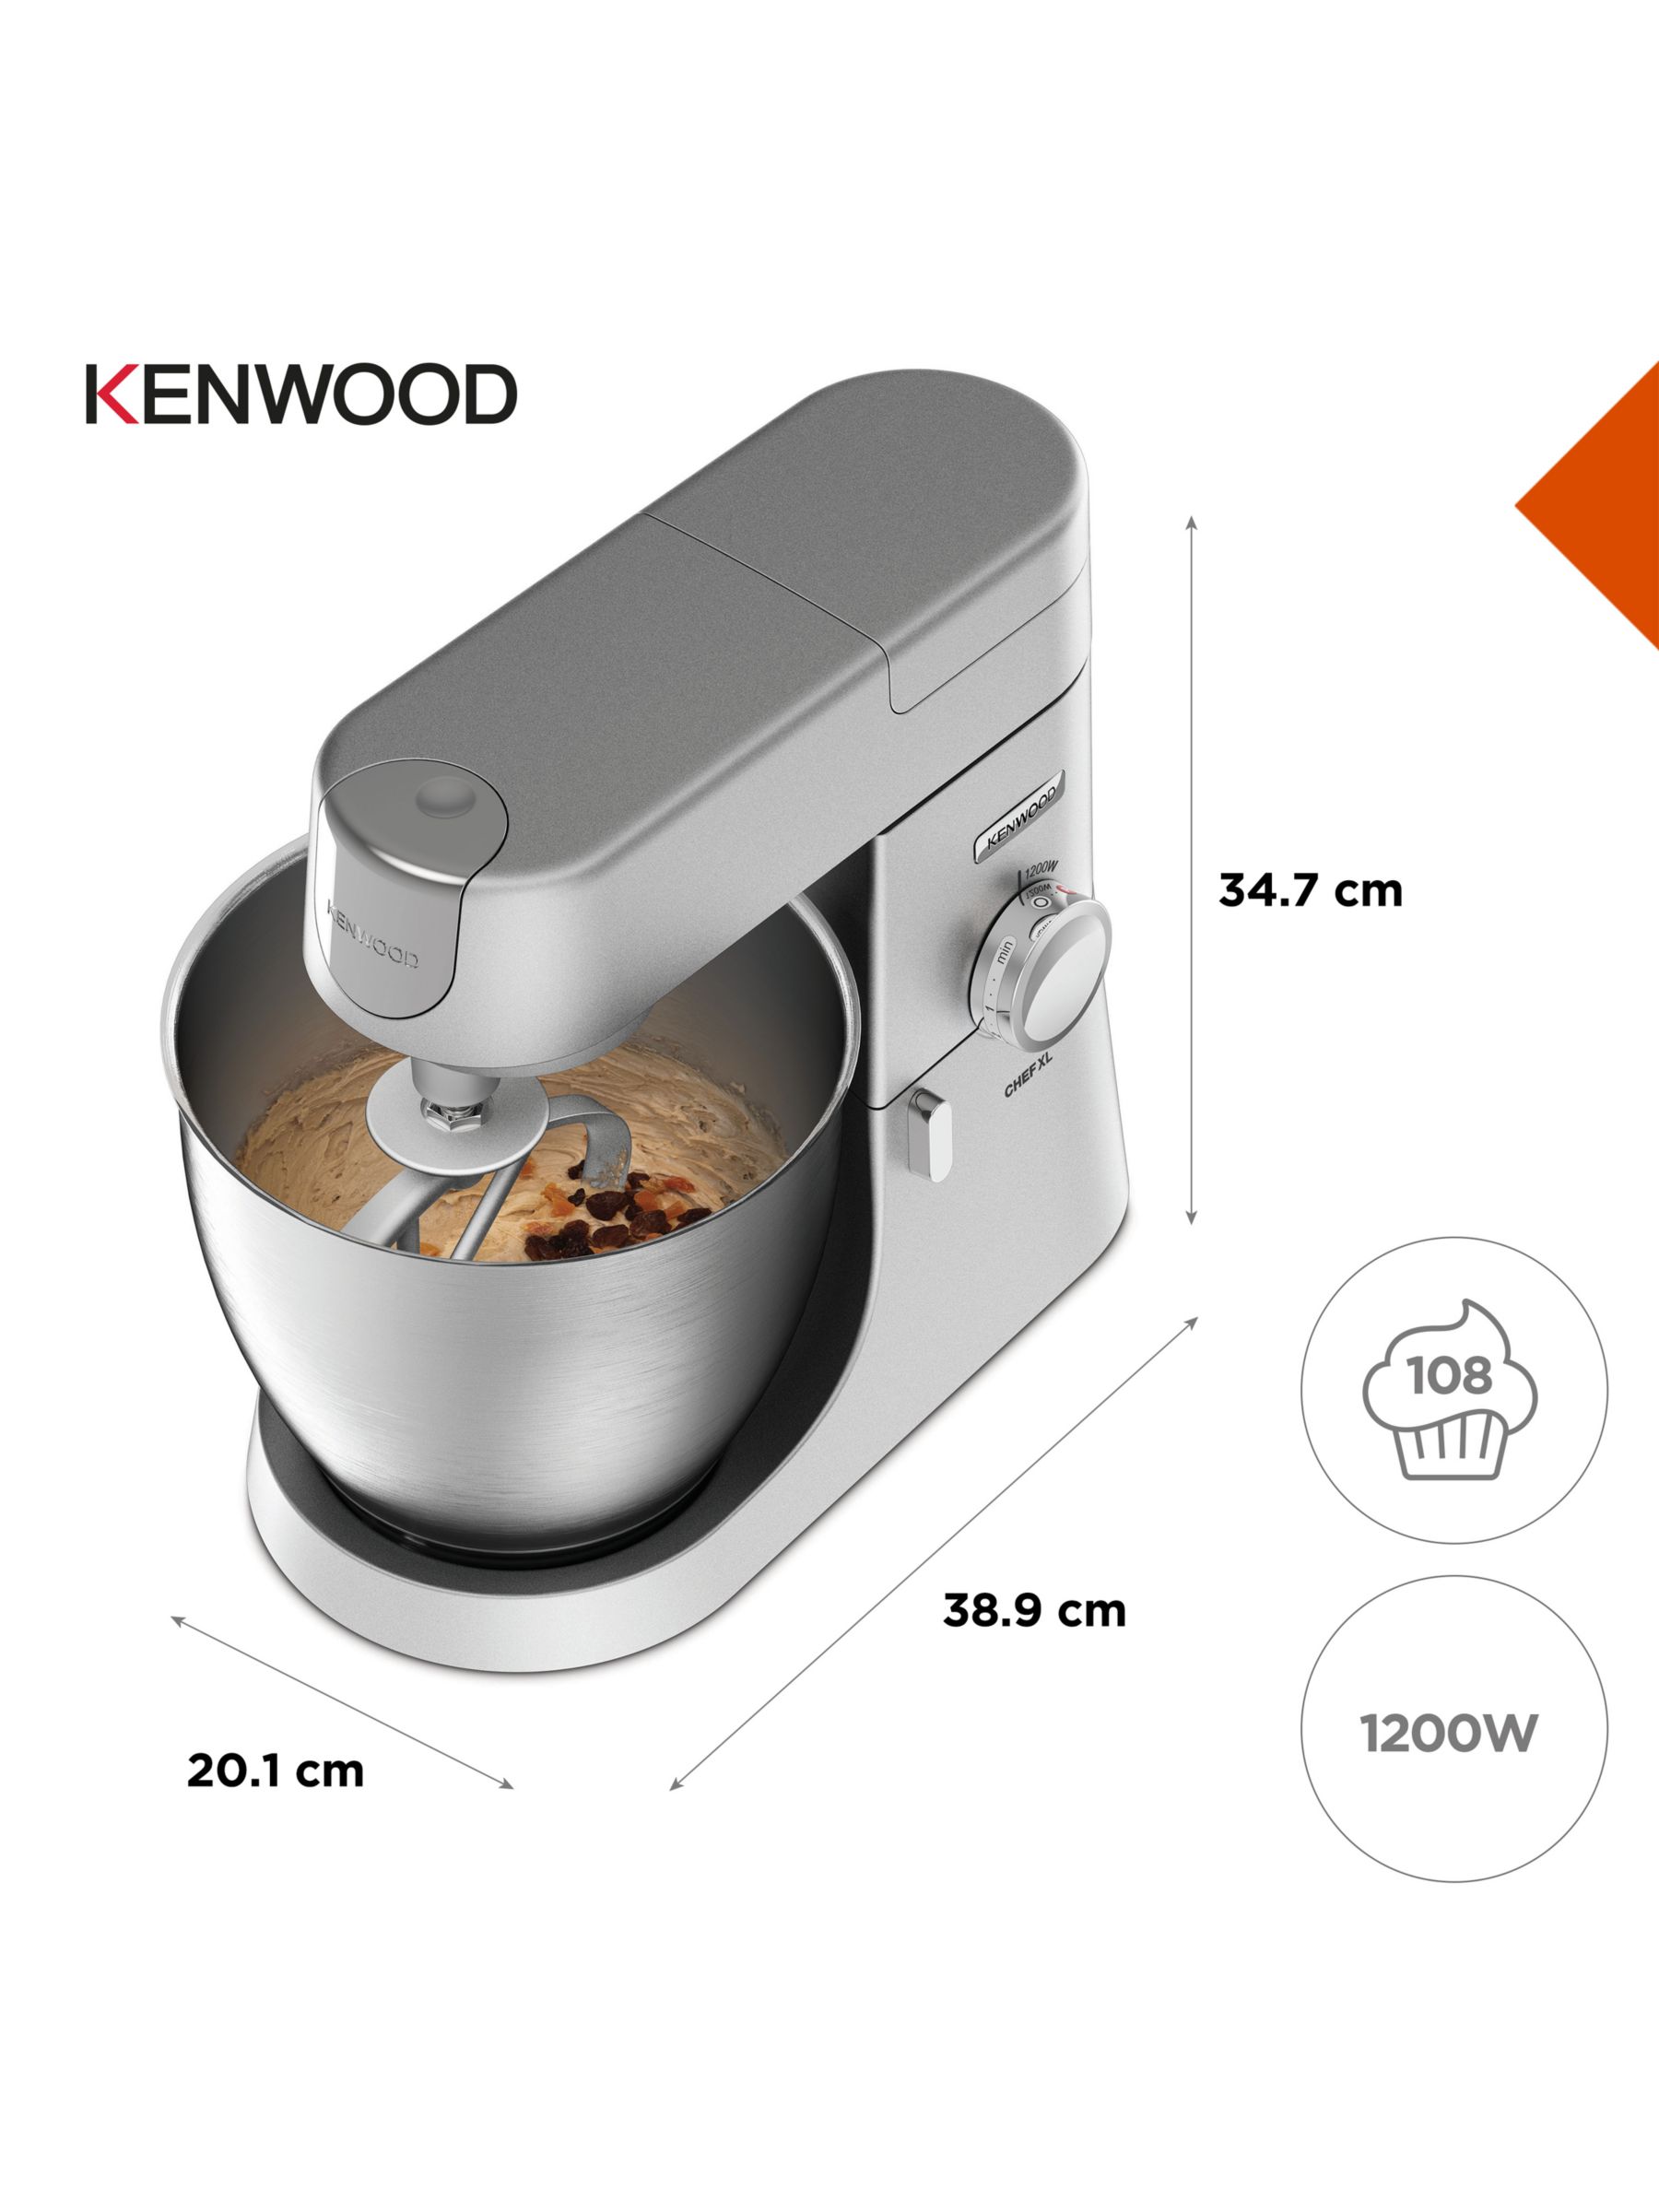 This is how you expand your Kenwood stand mixer - Coolblue